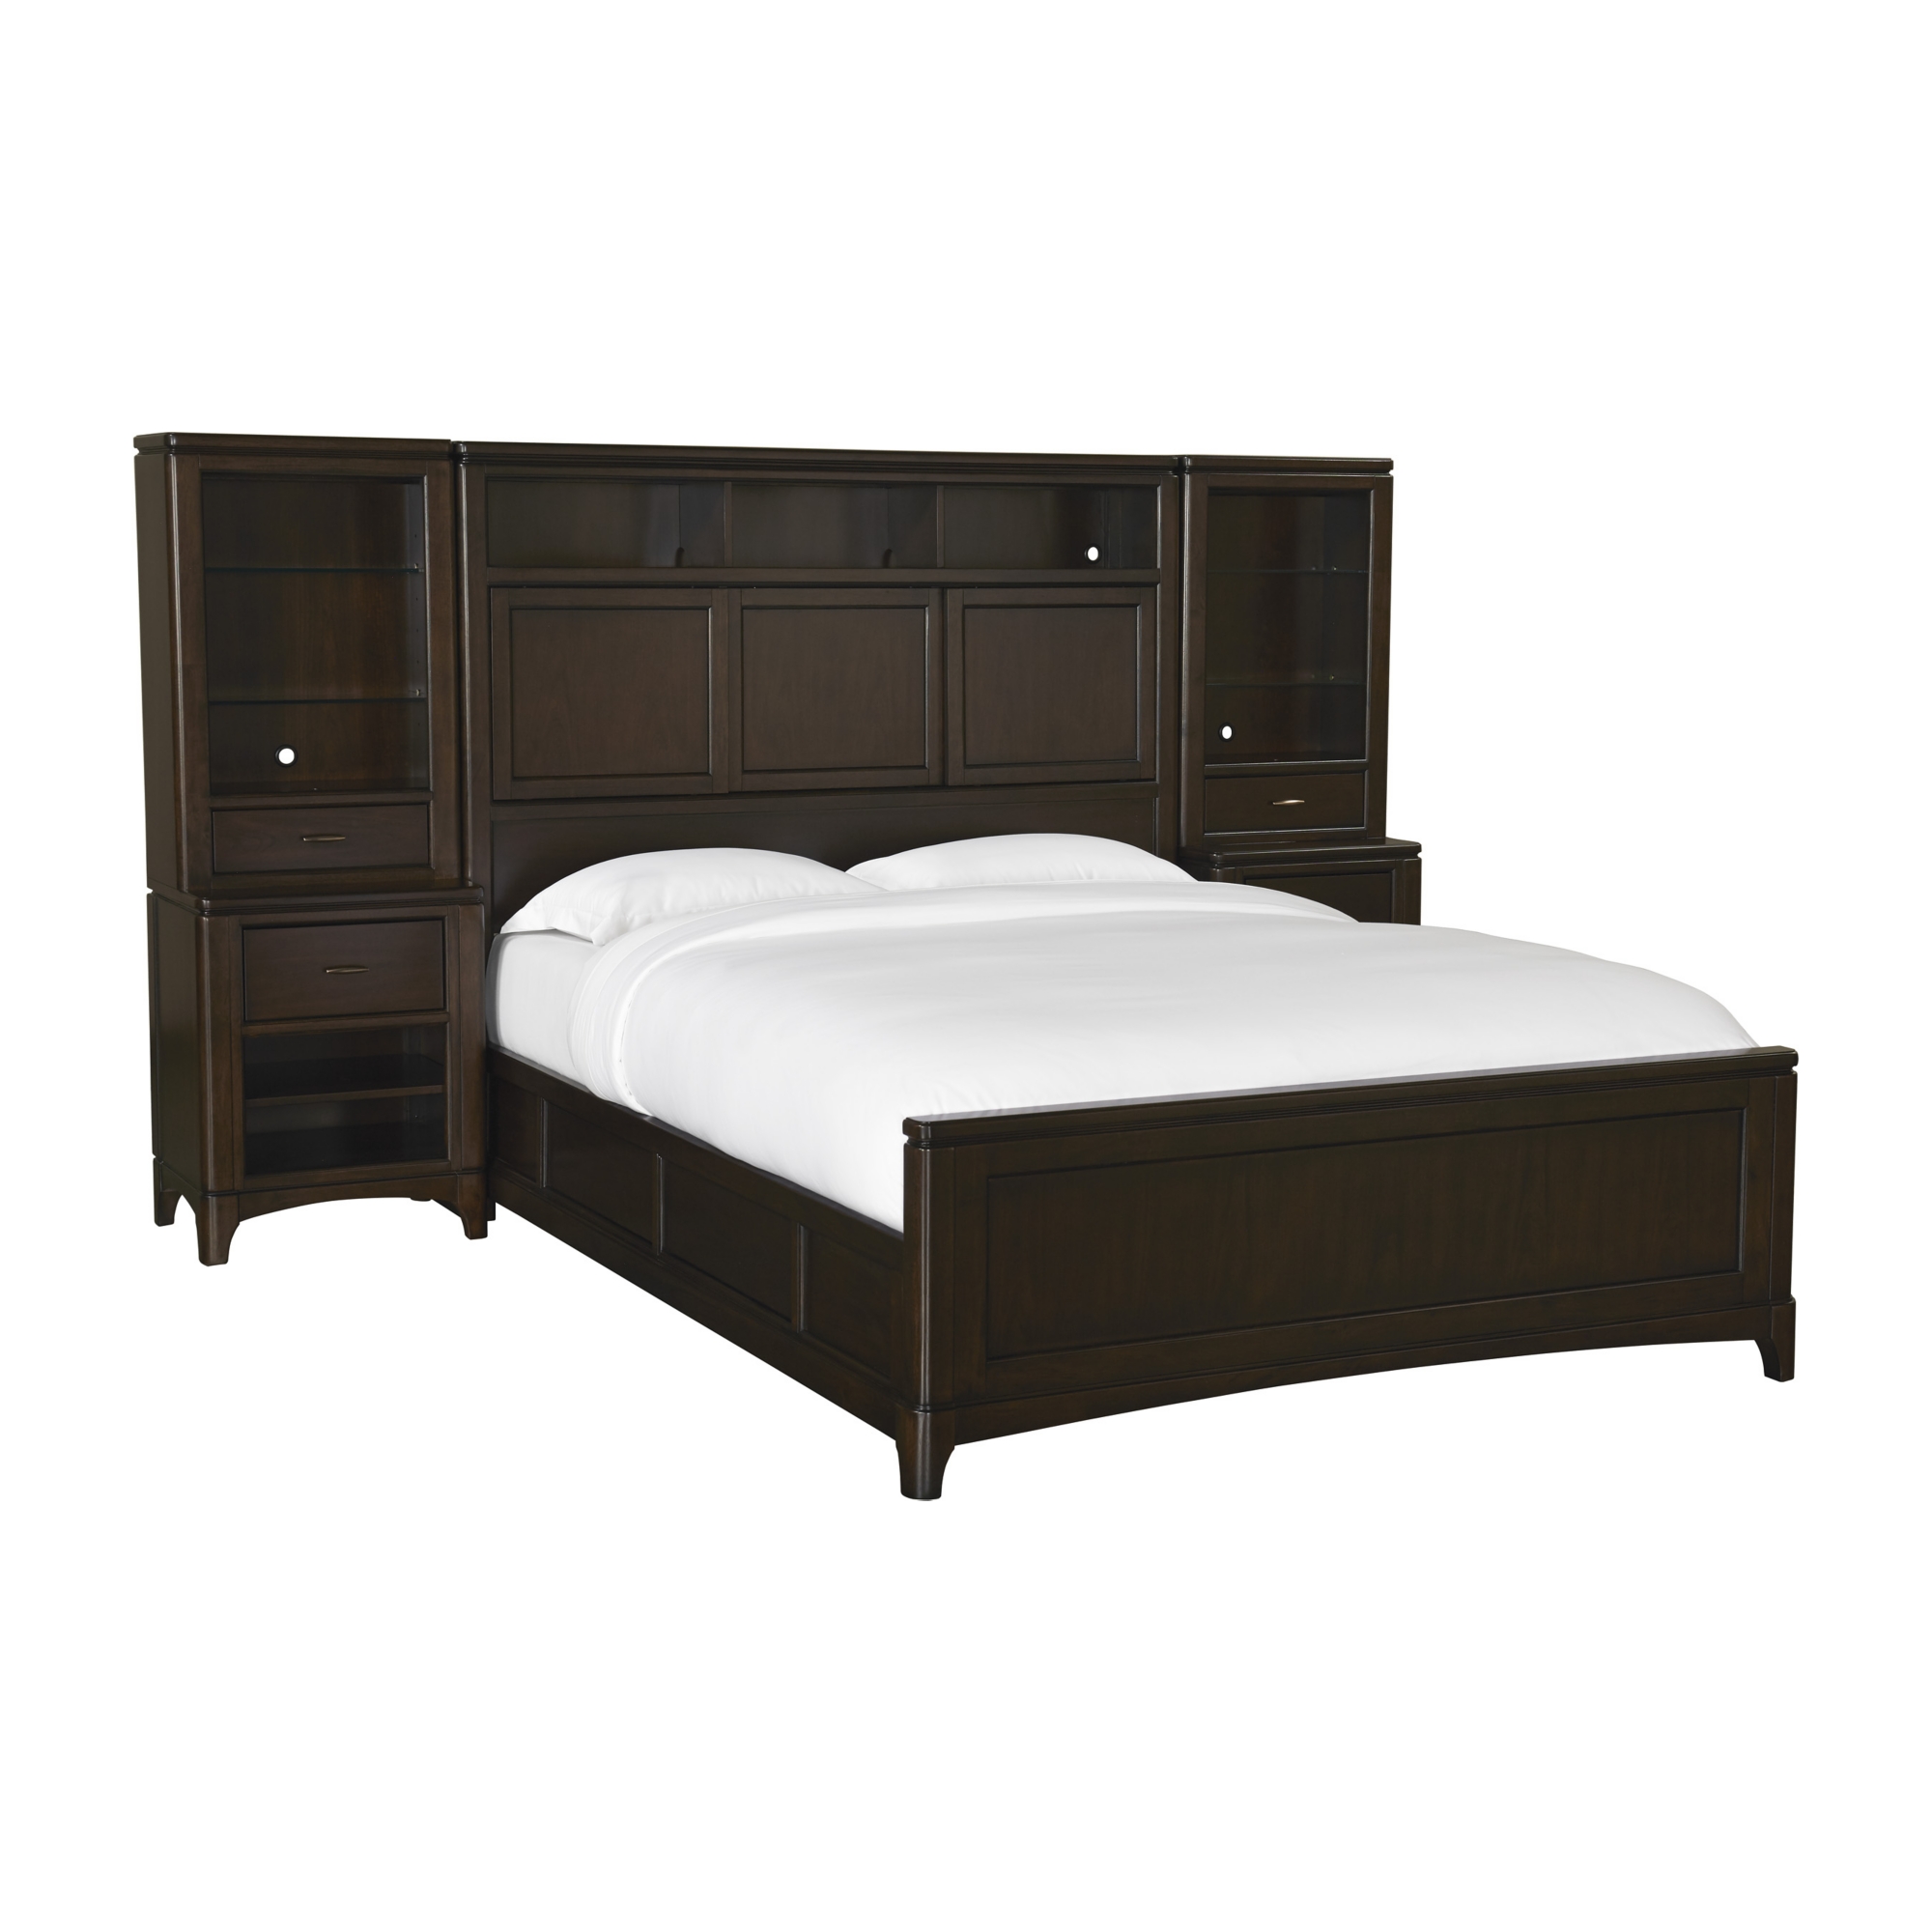 Gramercy Wall Bed Find The Perfect, Bowery Hill Storage Queen Wall Bed